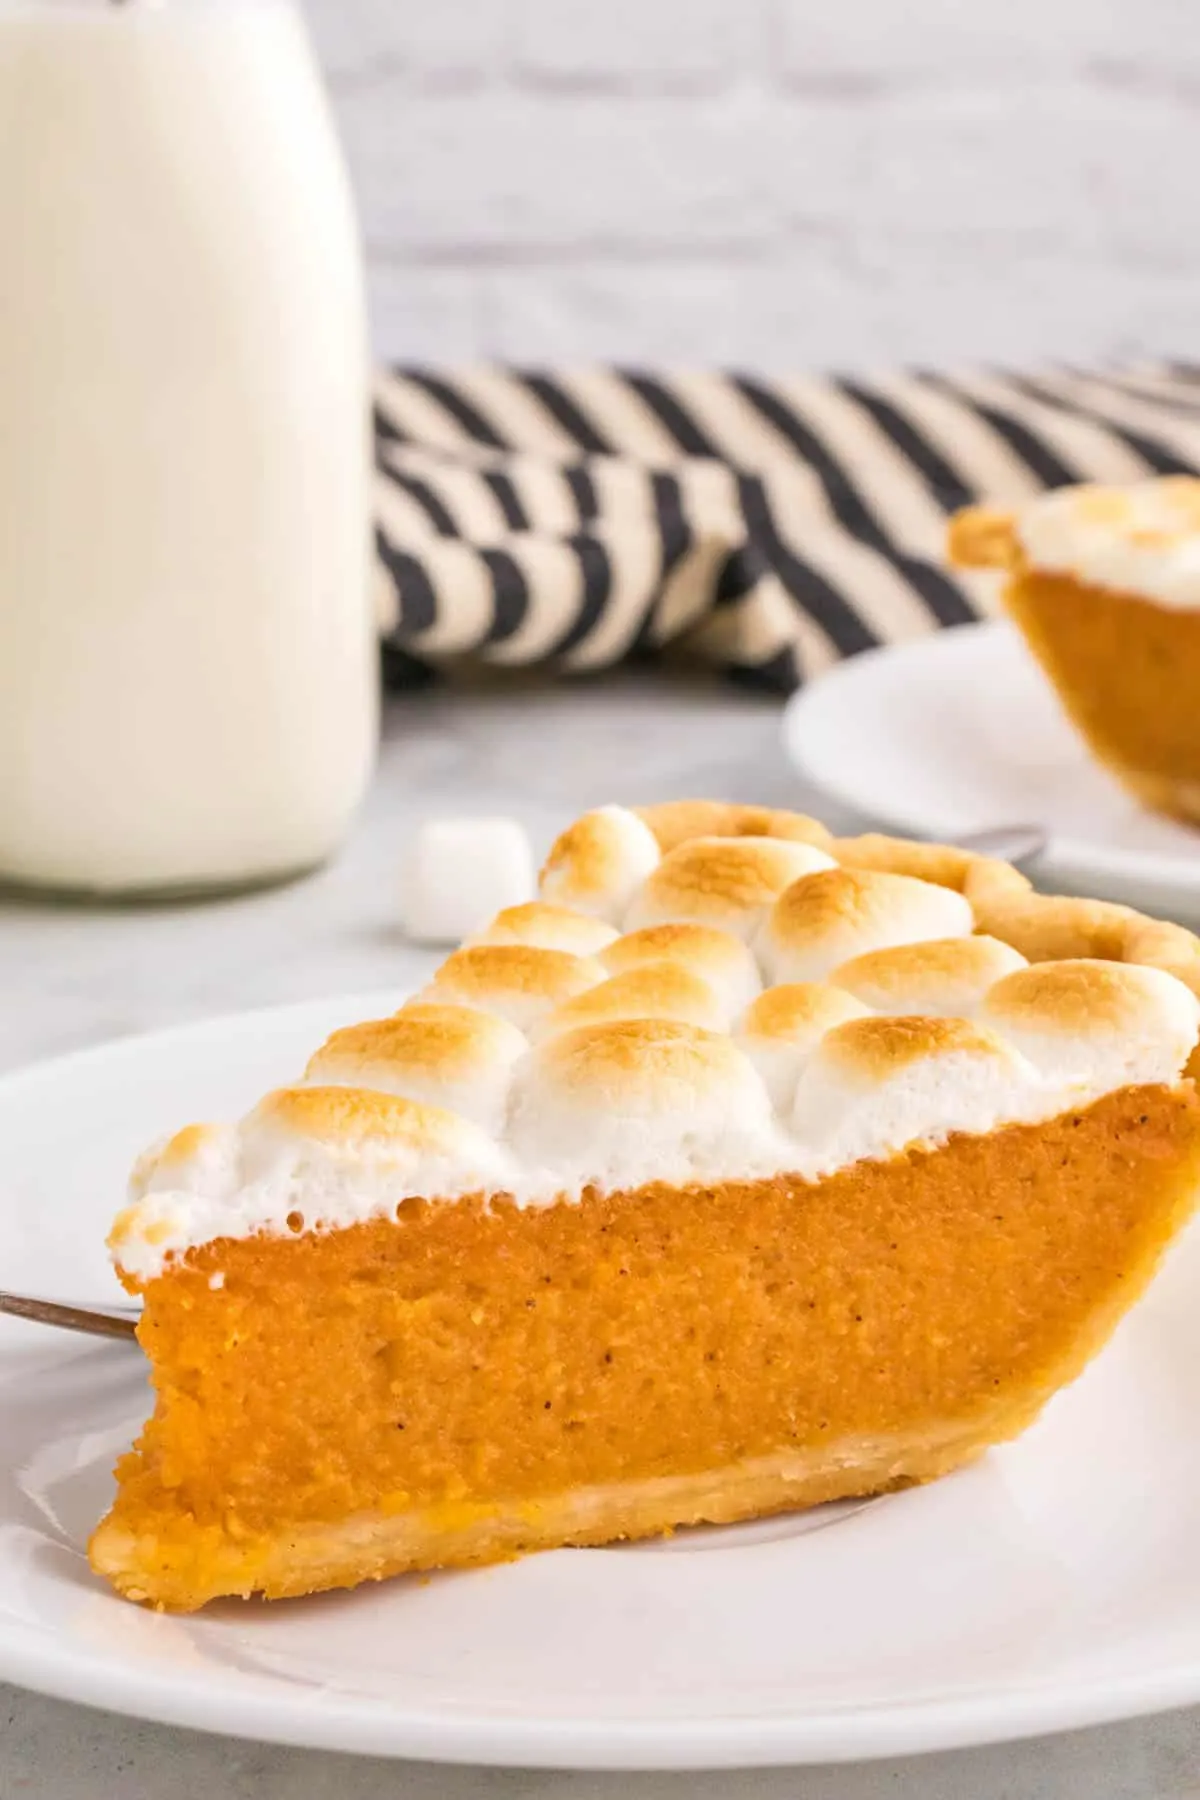 Sweet Potato Pie with Marshmallows is a classic Thanksgiving and Christmas dessert made with mashed sweet potatoes combined with butter, sugar, eggs, evaporated milk, cinnamon, nutmeg and ginger, baked in a flaky pie crust and topped with mini marshmallows.